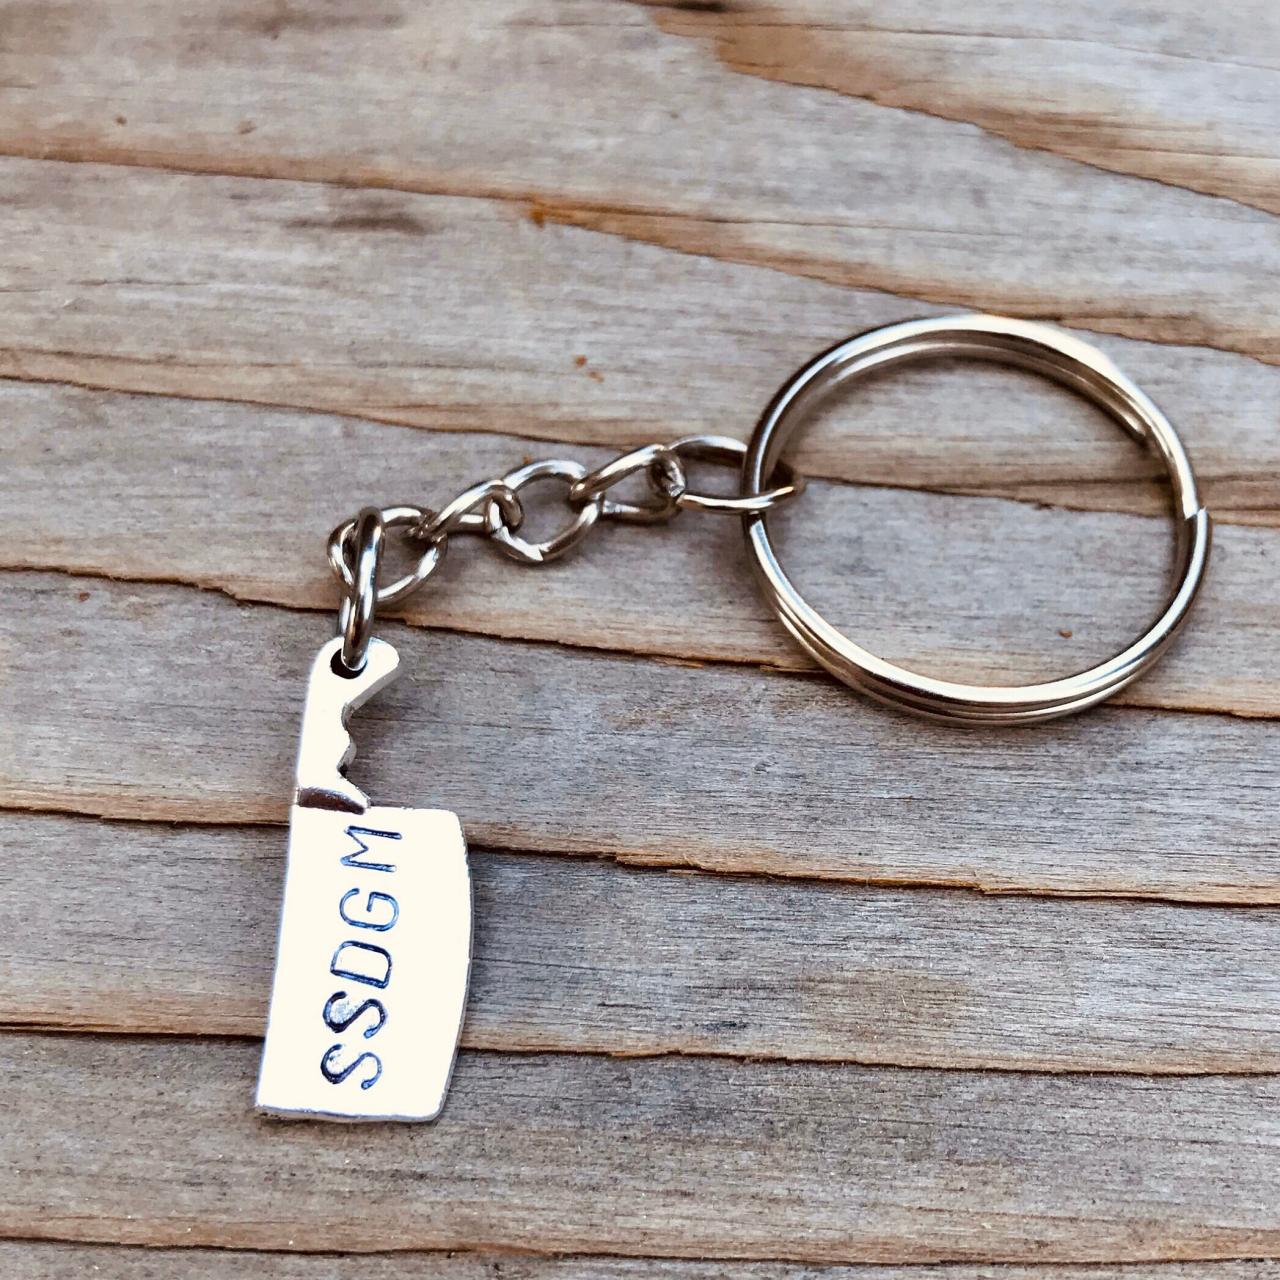 Ssdgm Customizable Keychain, True Crime, Weet Woo, Fuck Everyone, Listen, Fuck Politeness, Stay Sexy Don’t Get Murdered, Clever Charm,